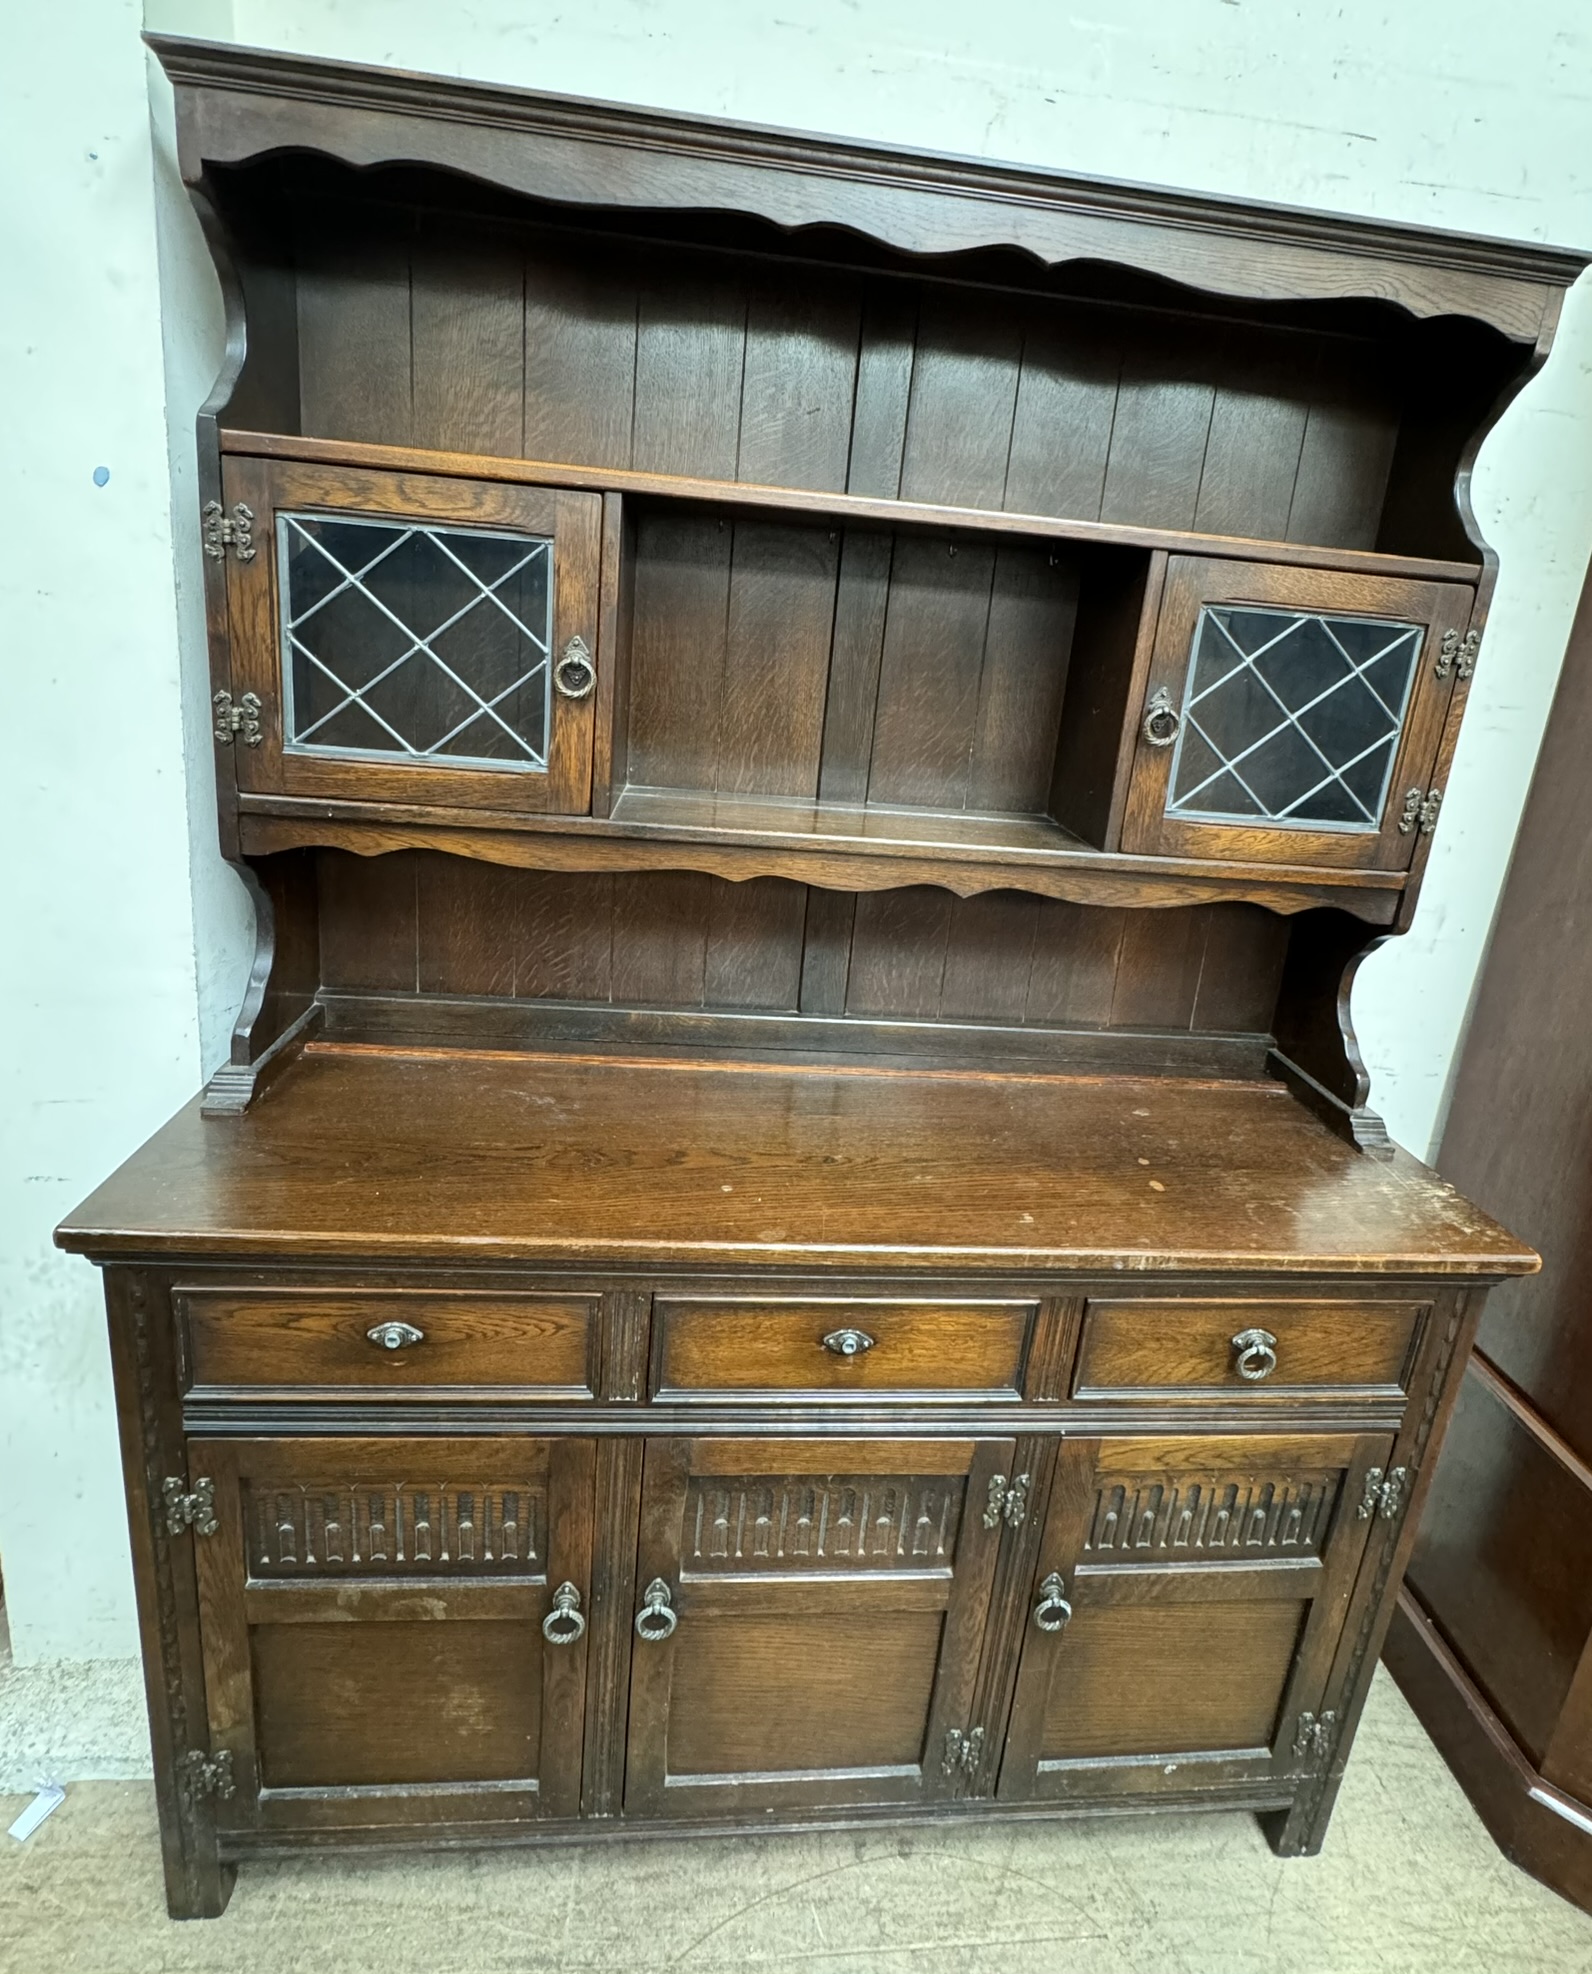 A 20th century oak dresser, the top with shelves and glazed cabinets,